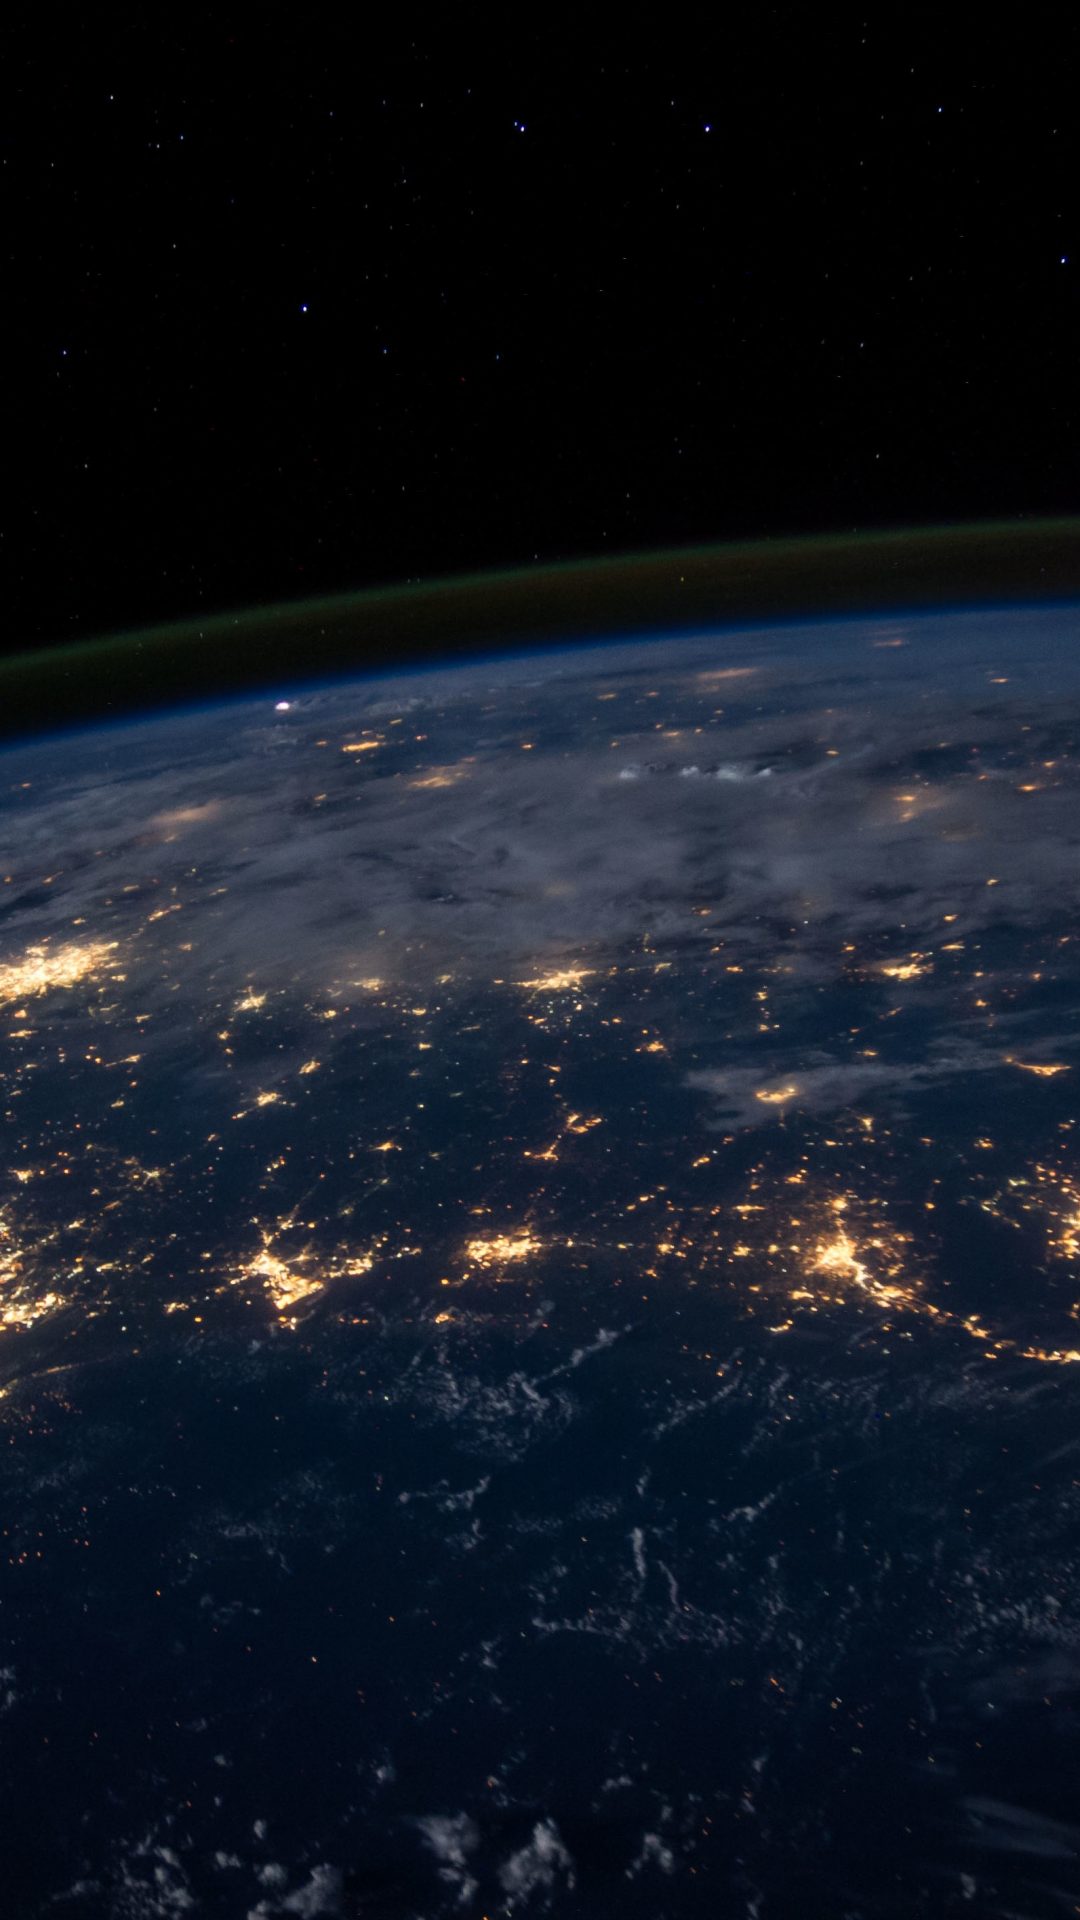 View Of Earth From Space At Night 4K UHD Wallpaper